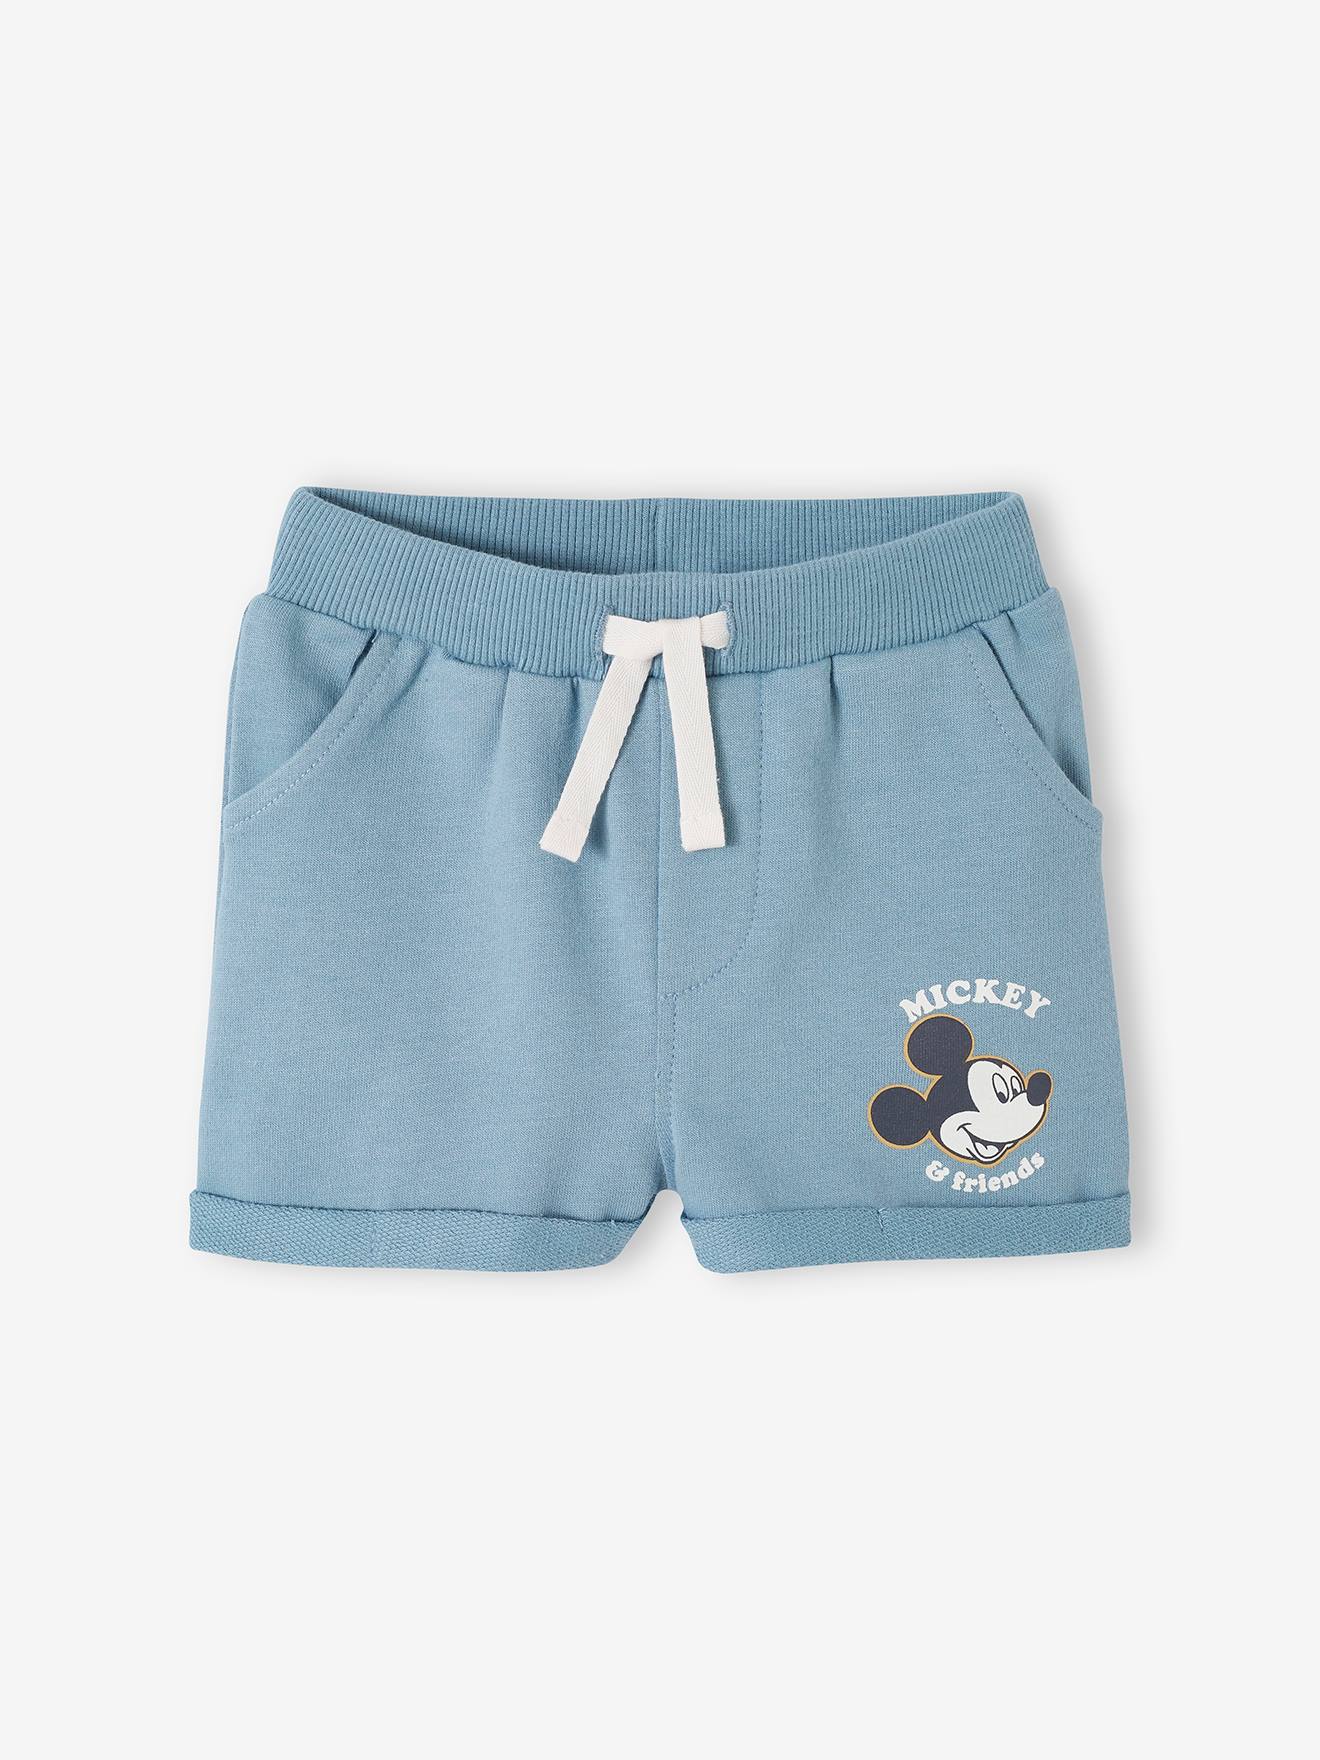 Mickey Mouse Shorts in Fleece for Baby Boys by Disney(r) sky blue